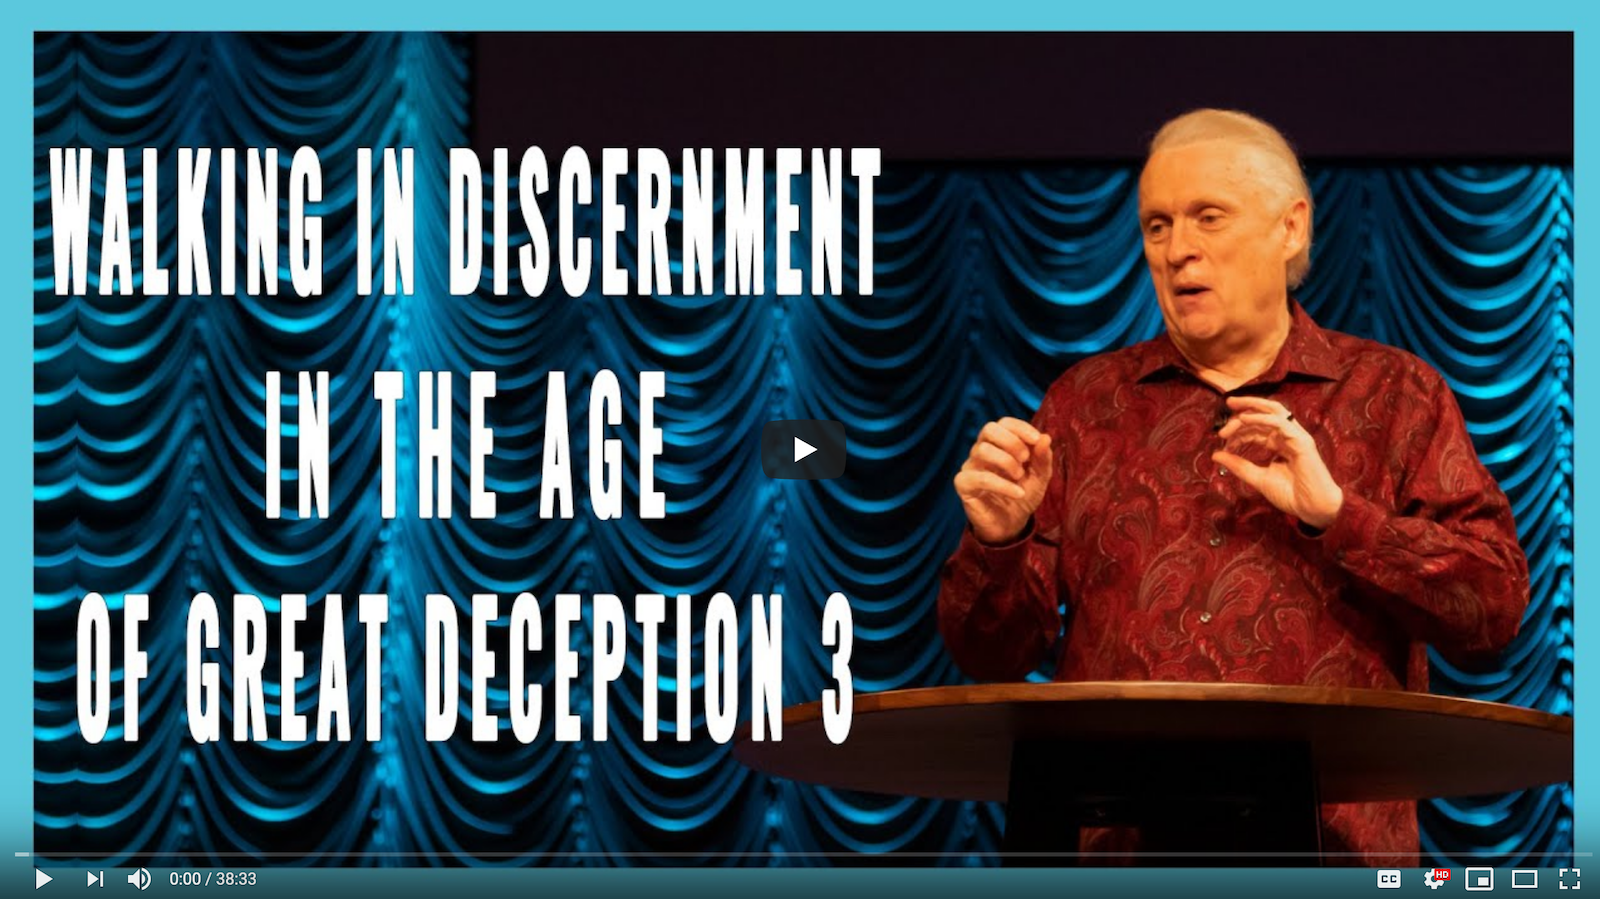 Walking in Discernment in the Age of Deception, Part 3: Walking in Partnership with the Holy Spirit